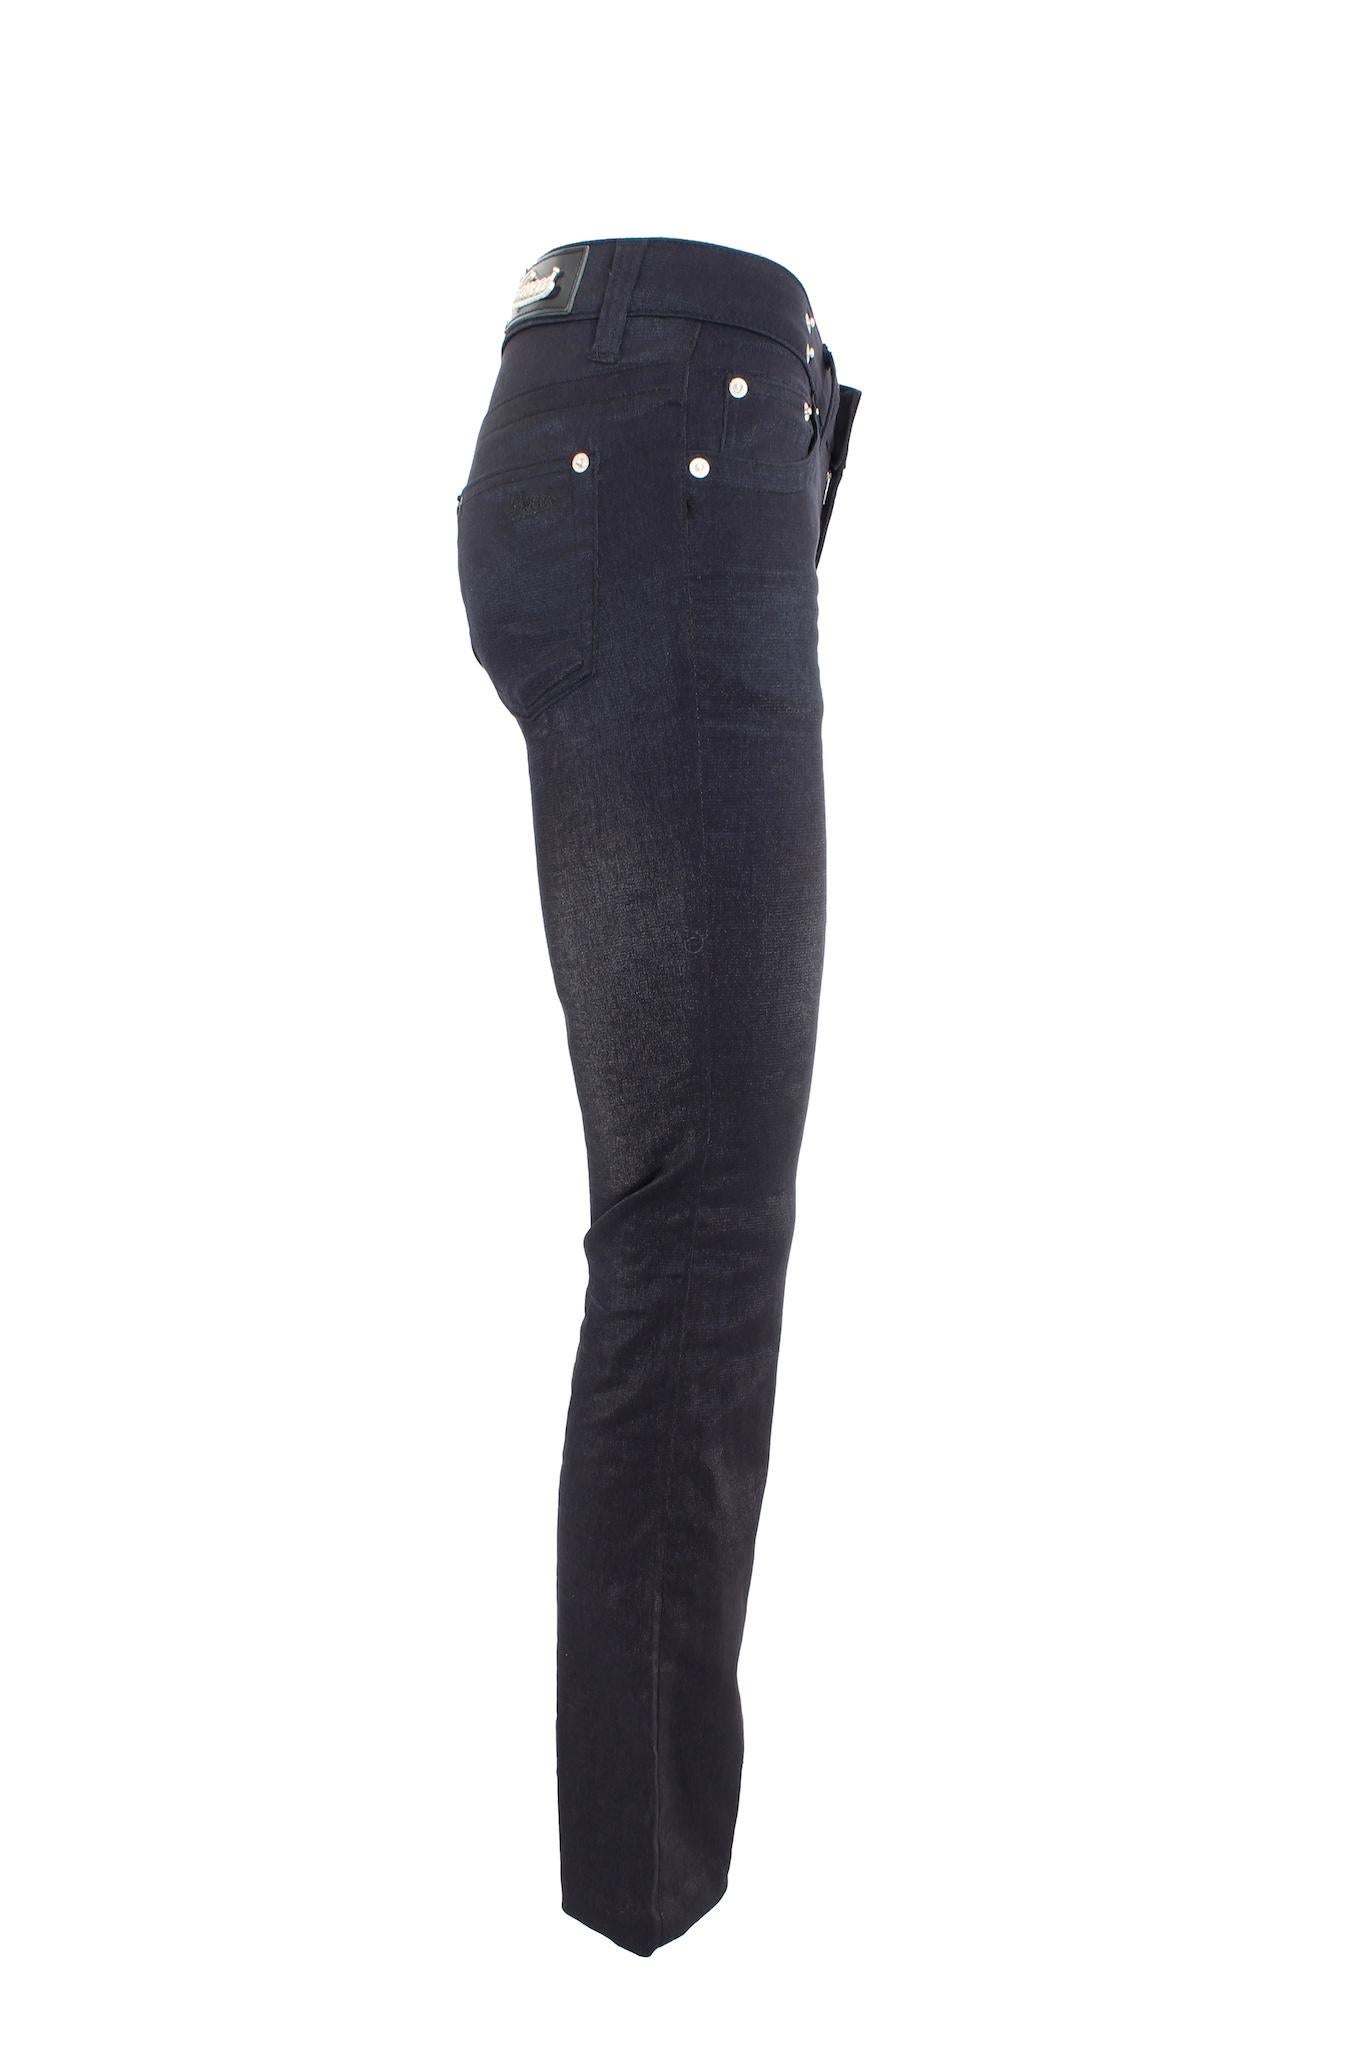 Gucci Black Pamuk Lurex Capri Jeans Pants 2000s  In Excellent Condition For Sale In Brindisi, Bt